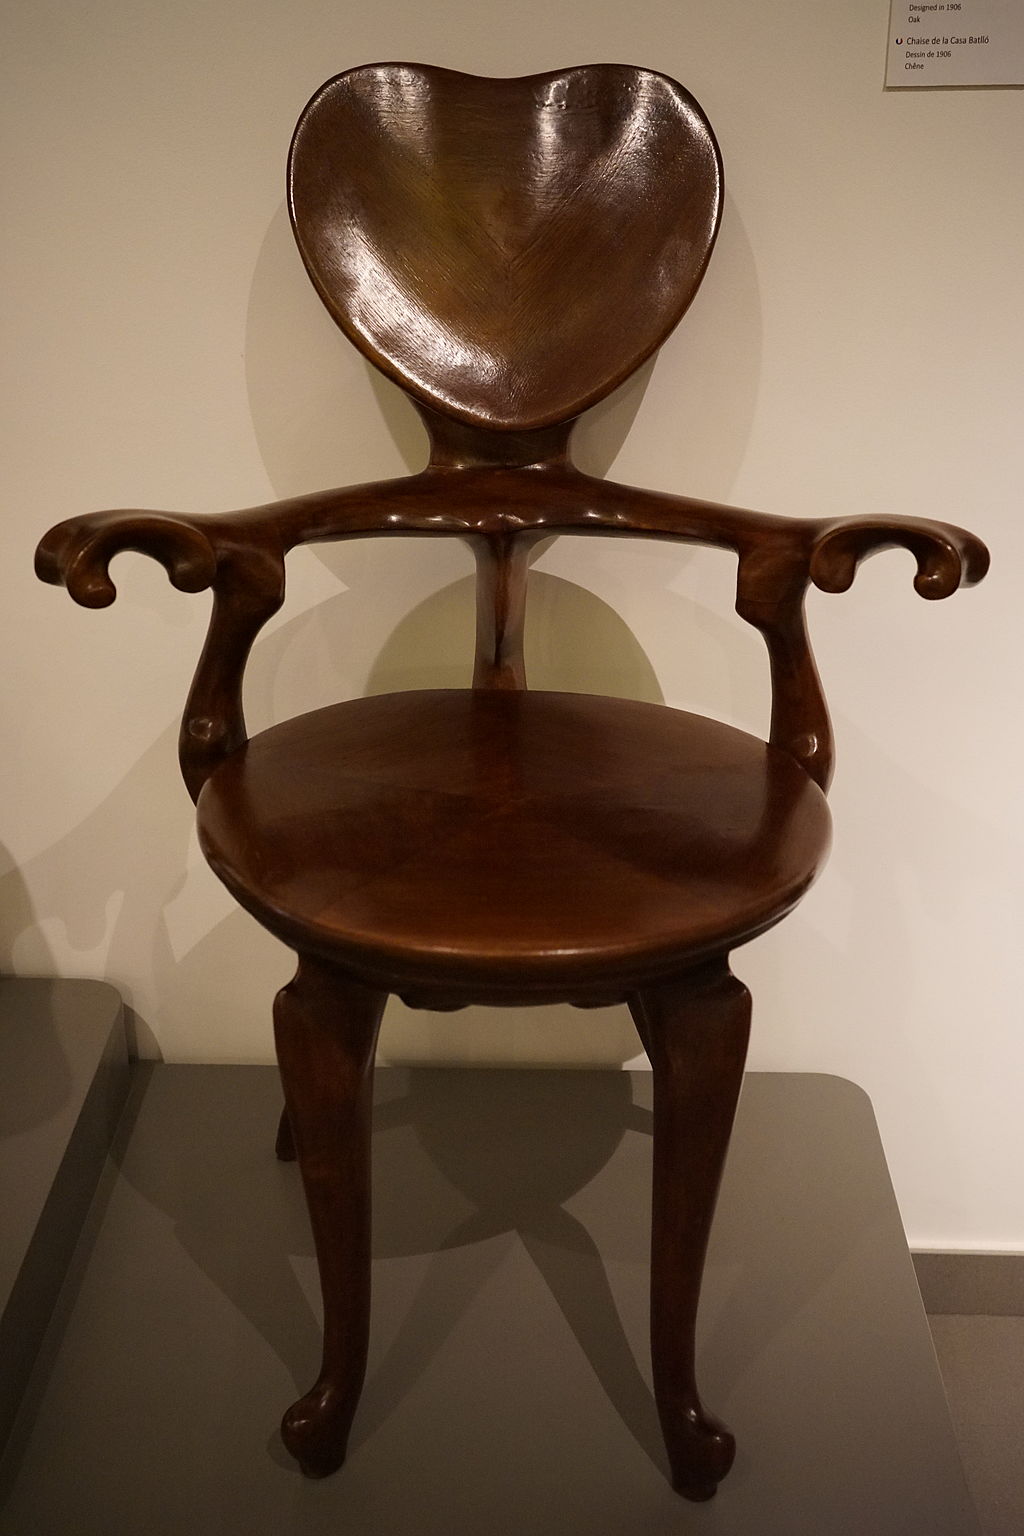 Chair in oak, designed 1906: Dark wood chair with a heart-shaped back and curvy arms. 